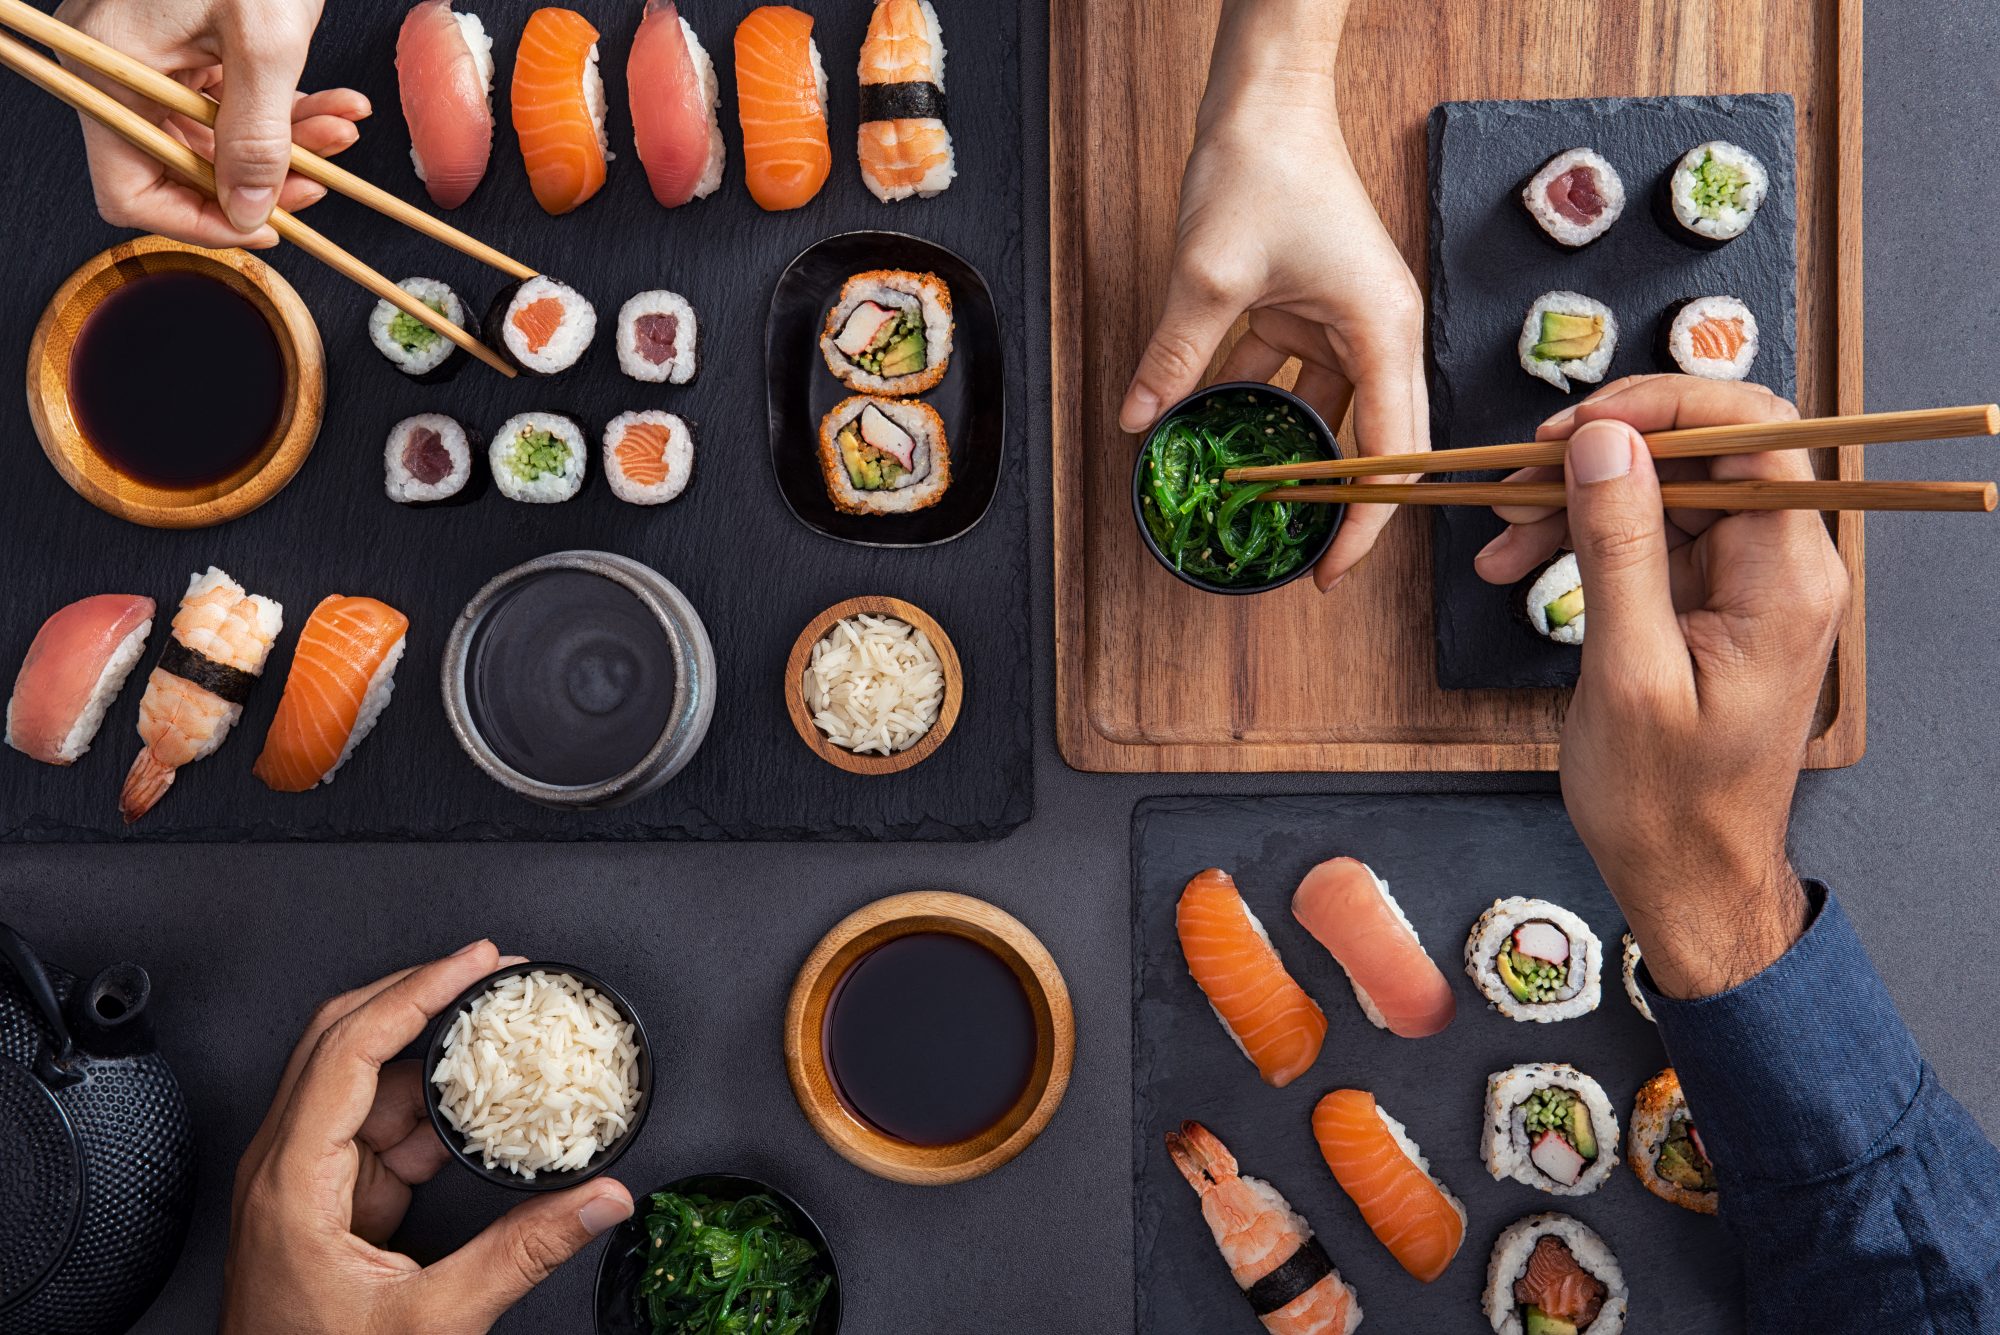 Top view of couple hands eating sushi food at japanese restaurant. High angle view of woman hand serving seaweed in little bowl with sesame to man while holding hosomaki with chopsticks. Couple eating and sharing sushi roll, maki, nigiri, uramaki.